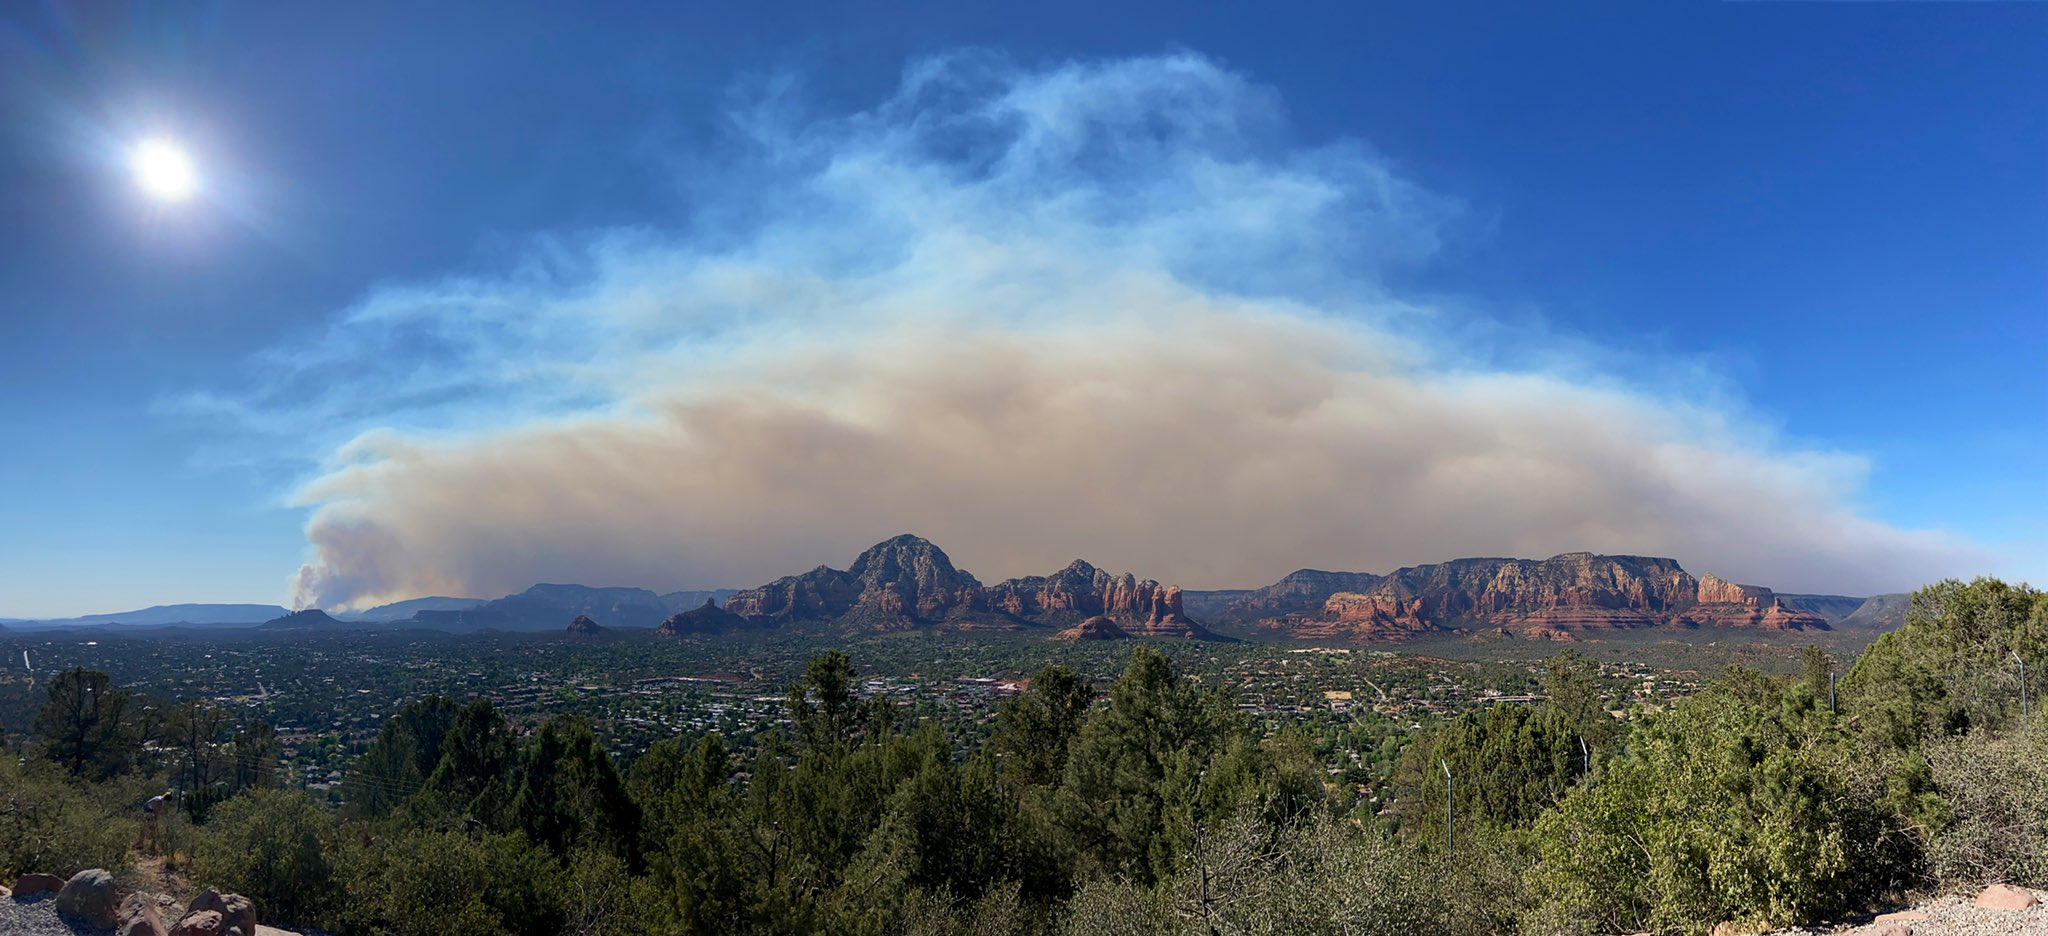 Rafael Fire on afternoon 6/21/21 looking over Sedona and the Red Rocks